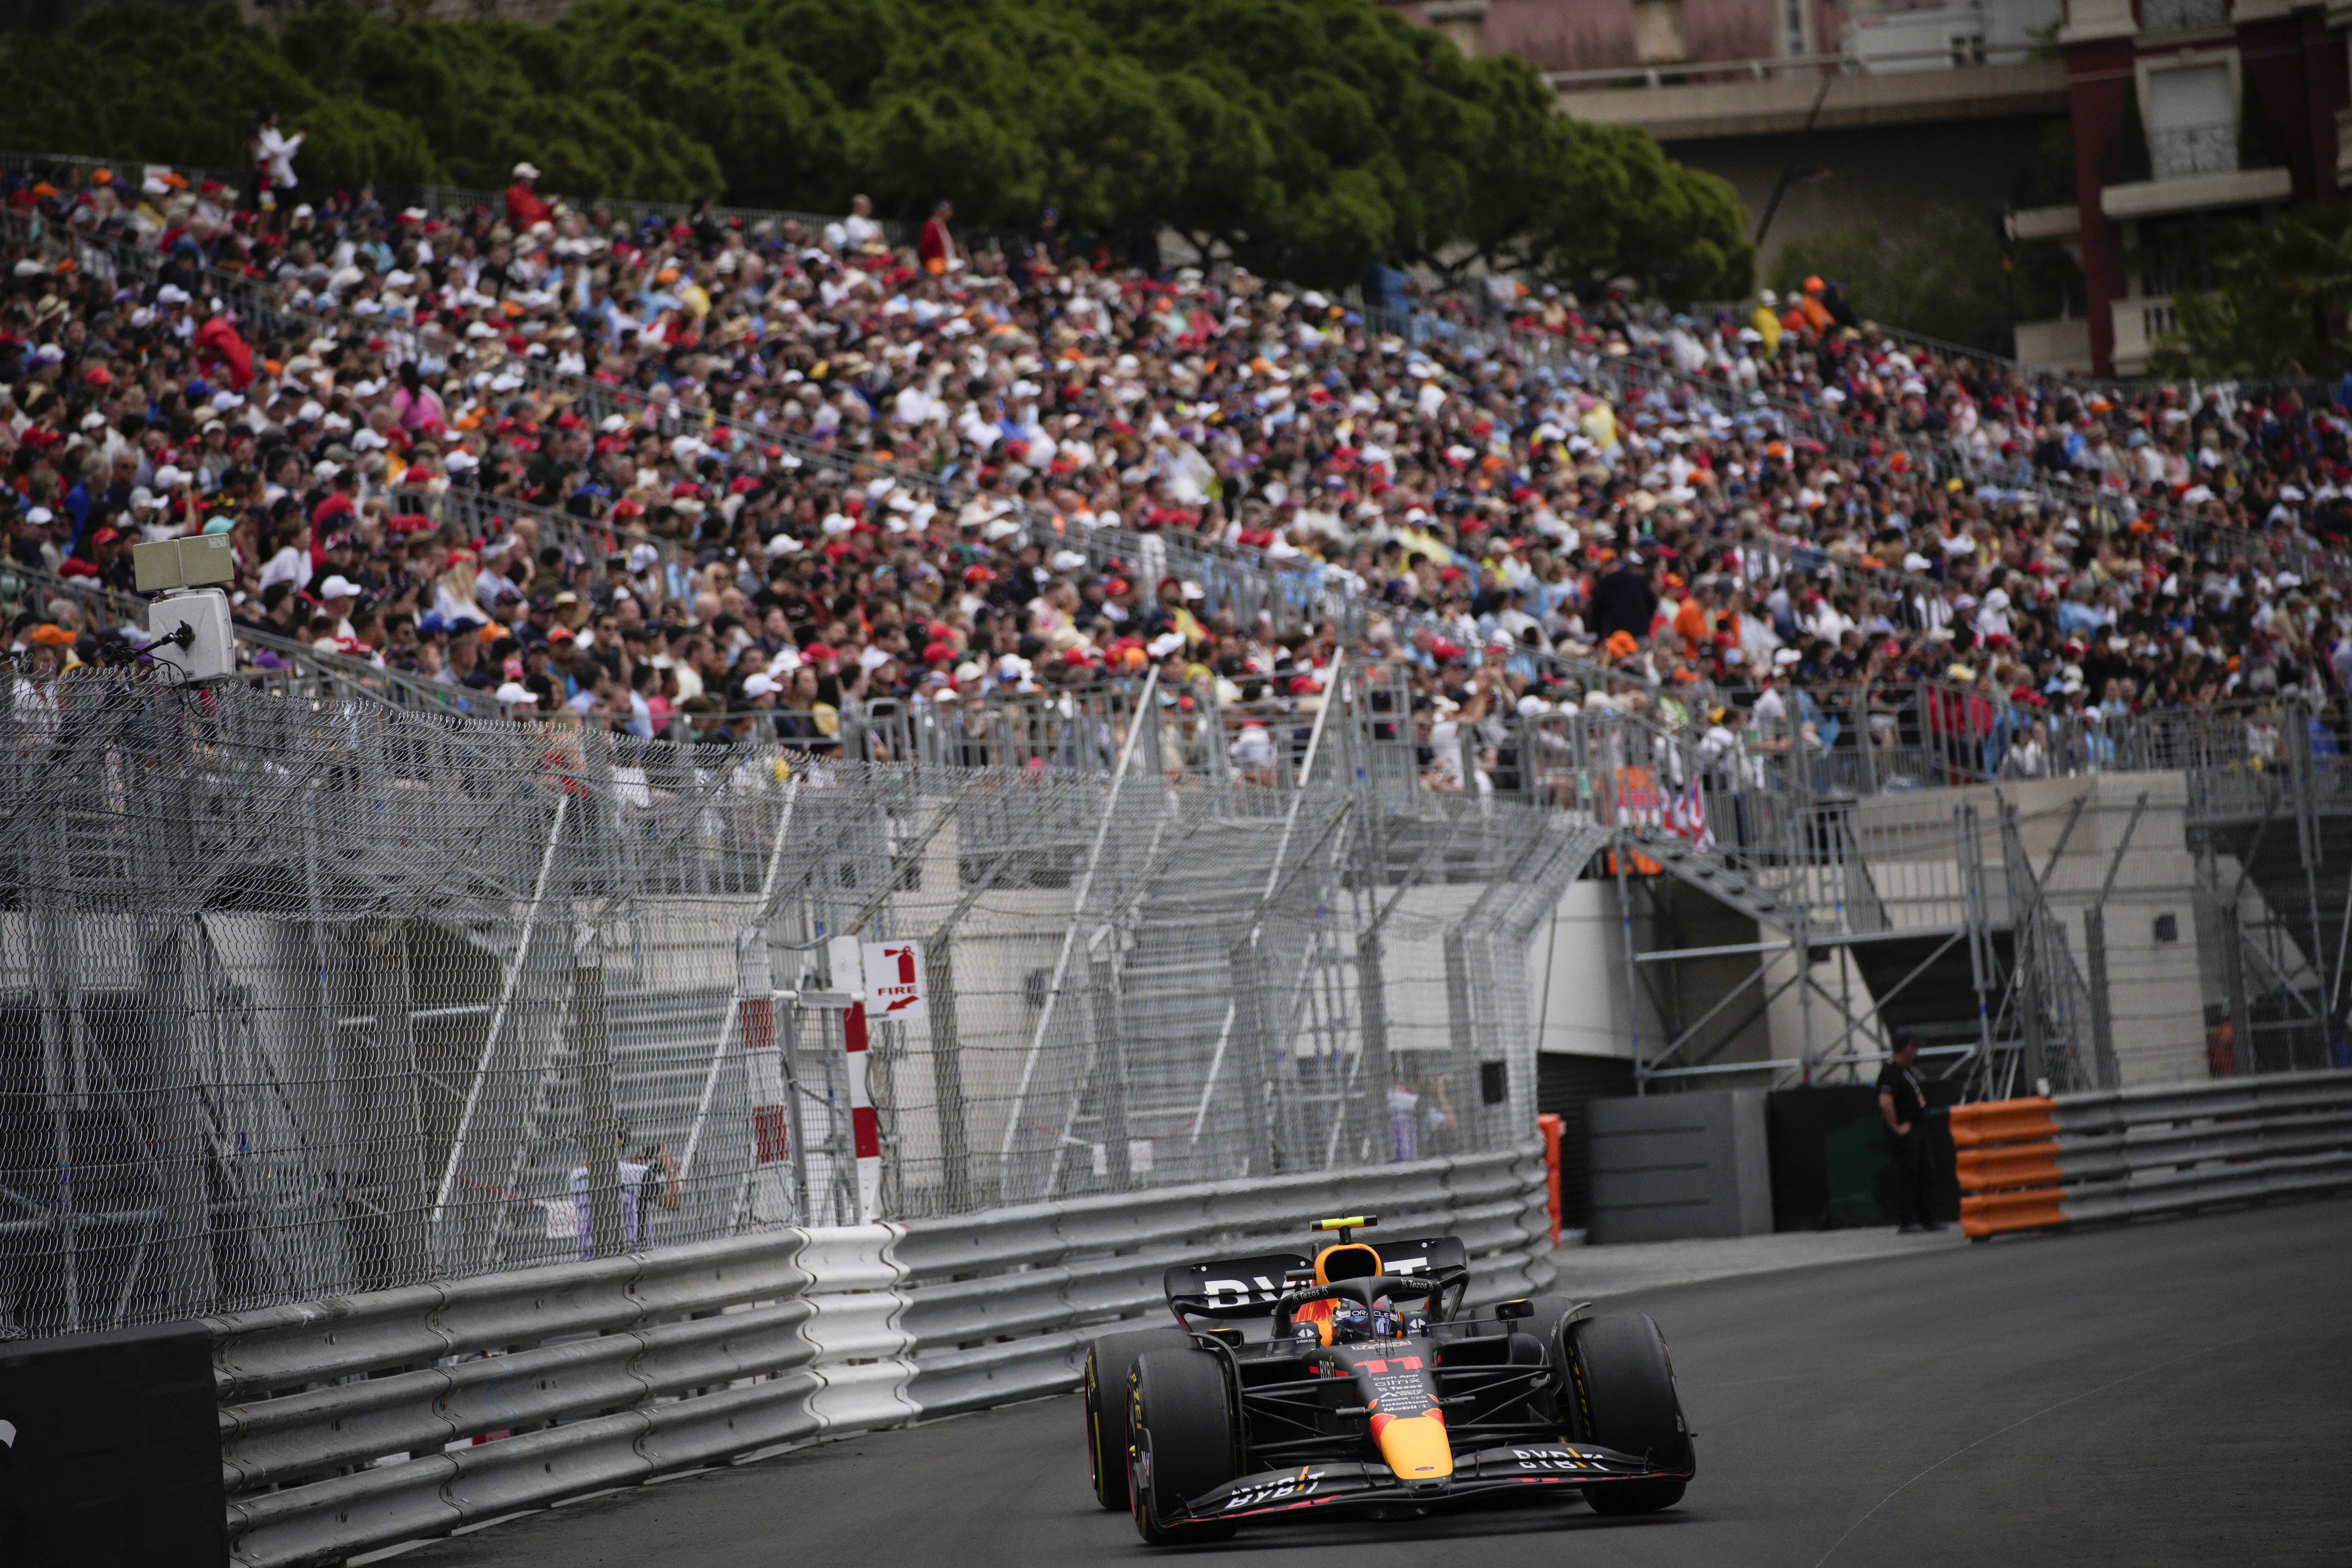 Has Formula One outgrown Monaco and its famous street race? - ESPN